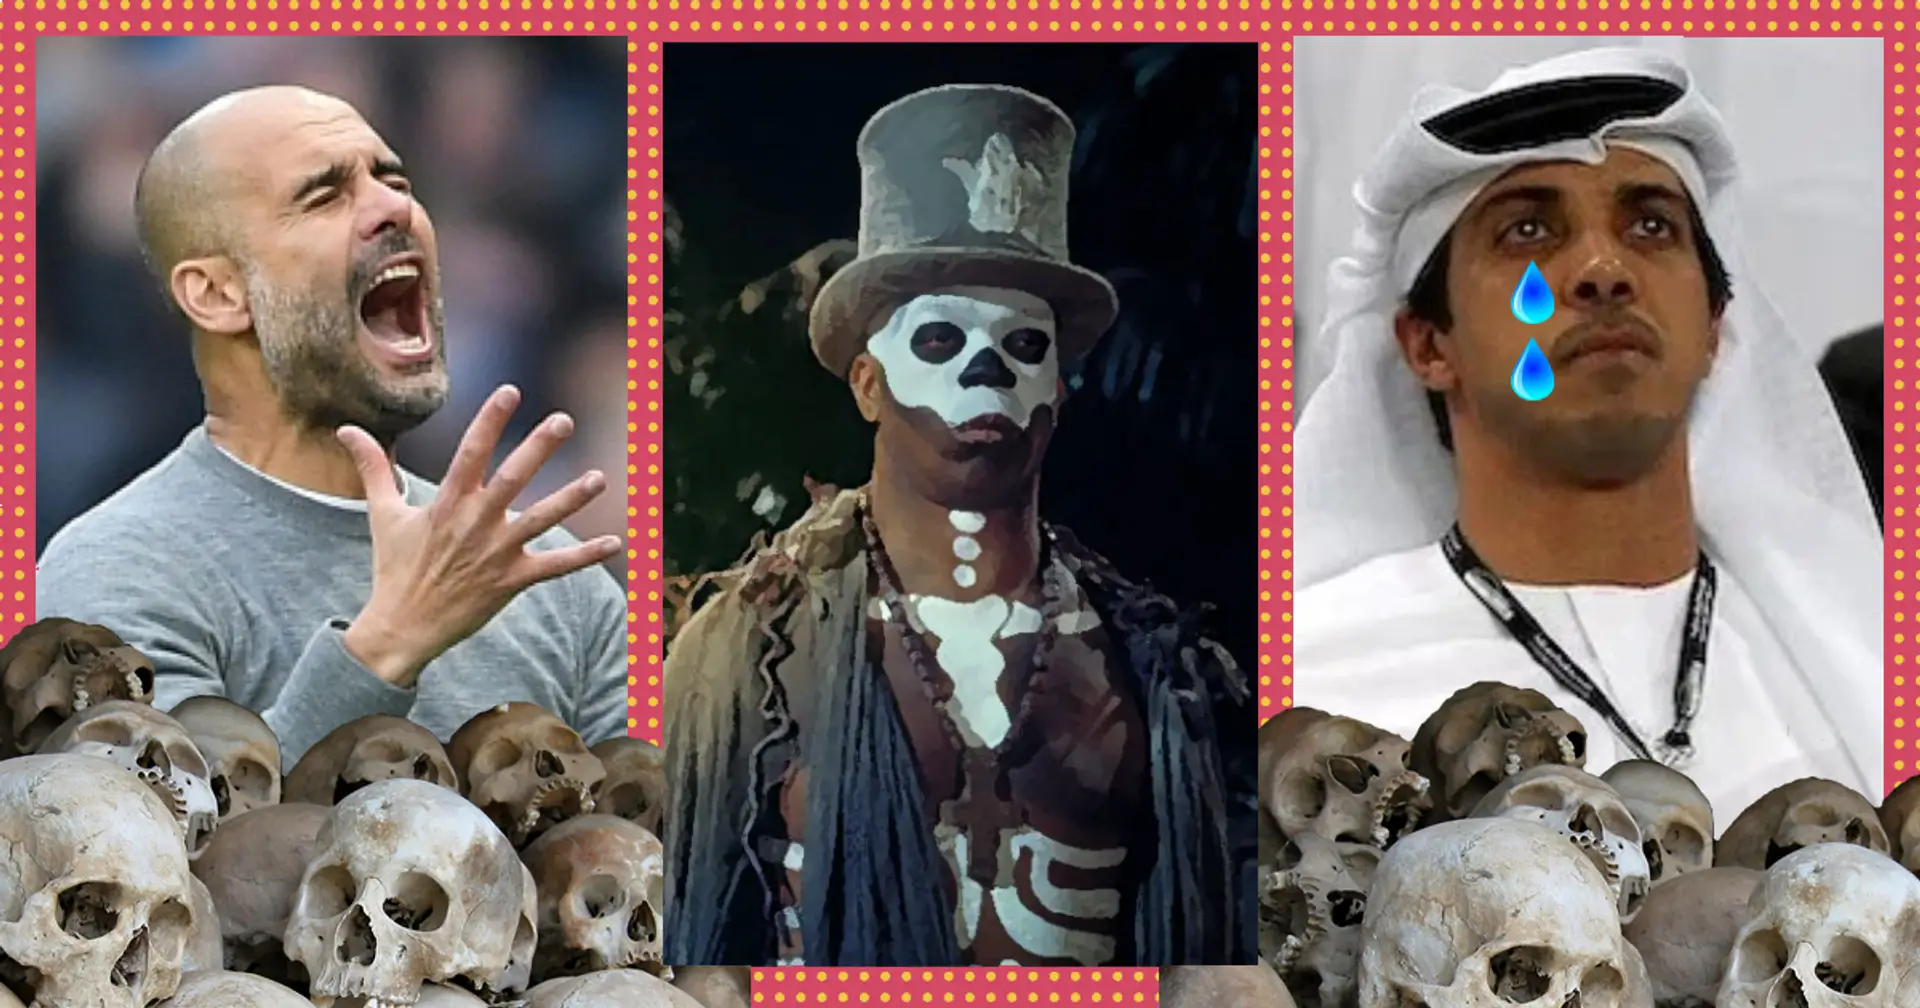 ‘I did it in the name of love for Barca’: Voodoo priest puts a curse on 4 top clubs